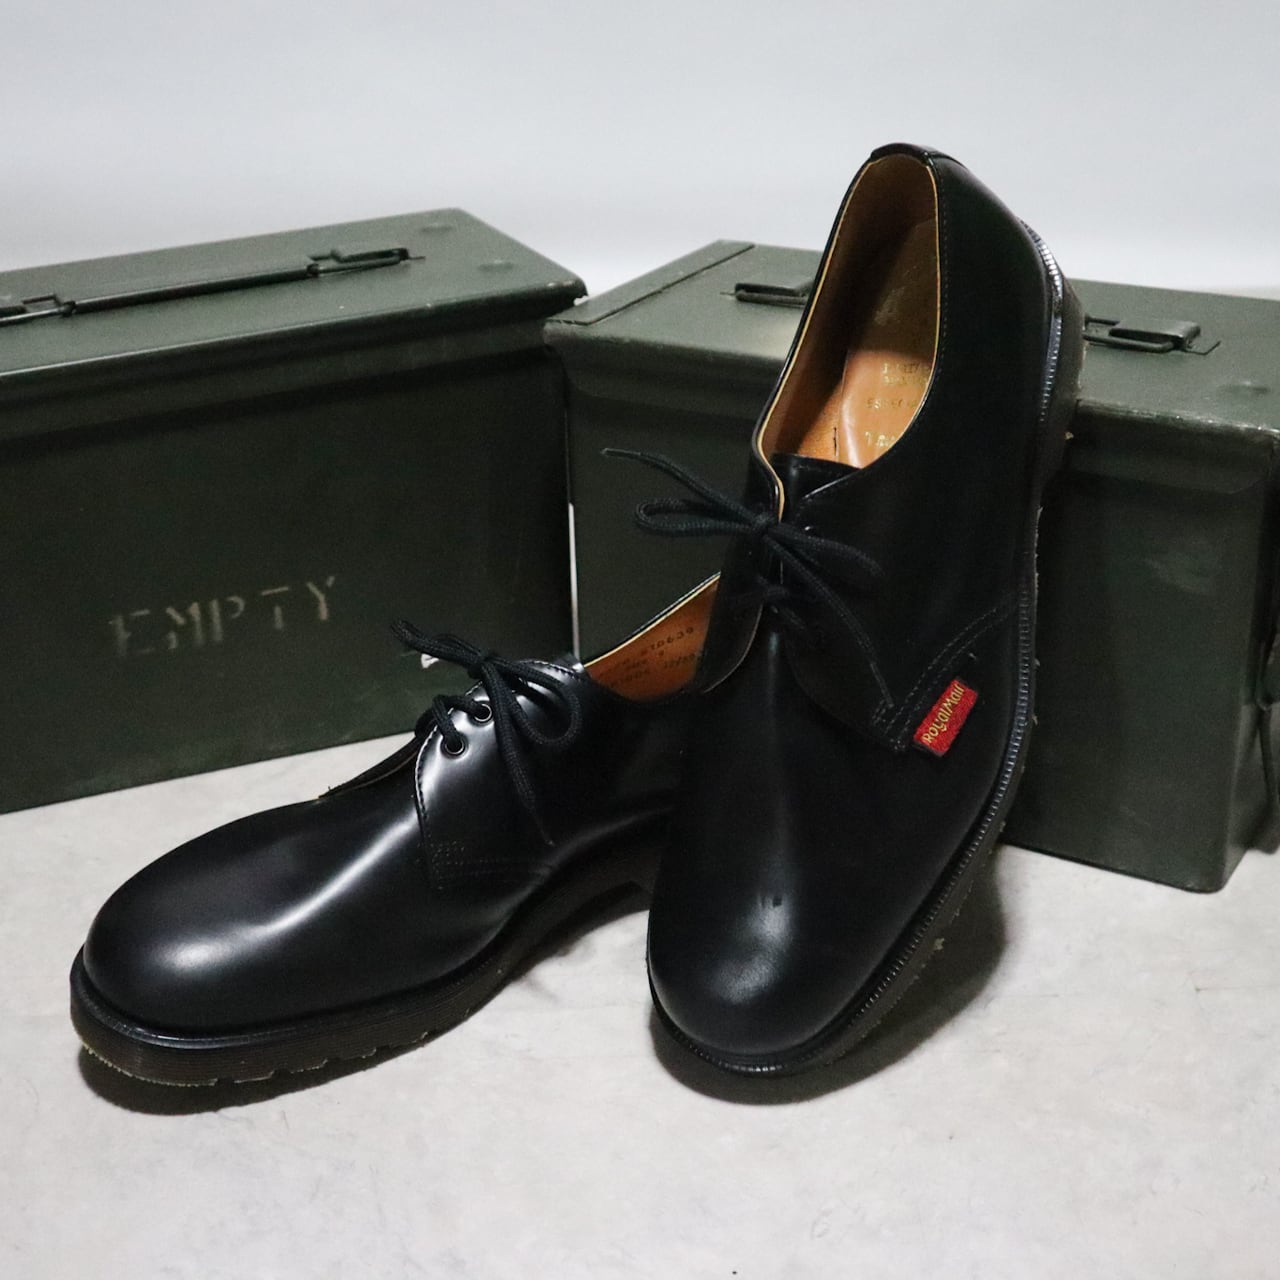 【DEAD STOCK】Dr.Martens for ROYAL MAIL POSTMAN SHOES MADE IN ENGLAND  ドクターマーチン ロイヤルメール ポストマンシューズ 英国製 デッドストック | CADAL8